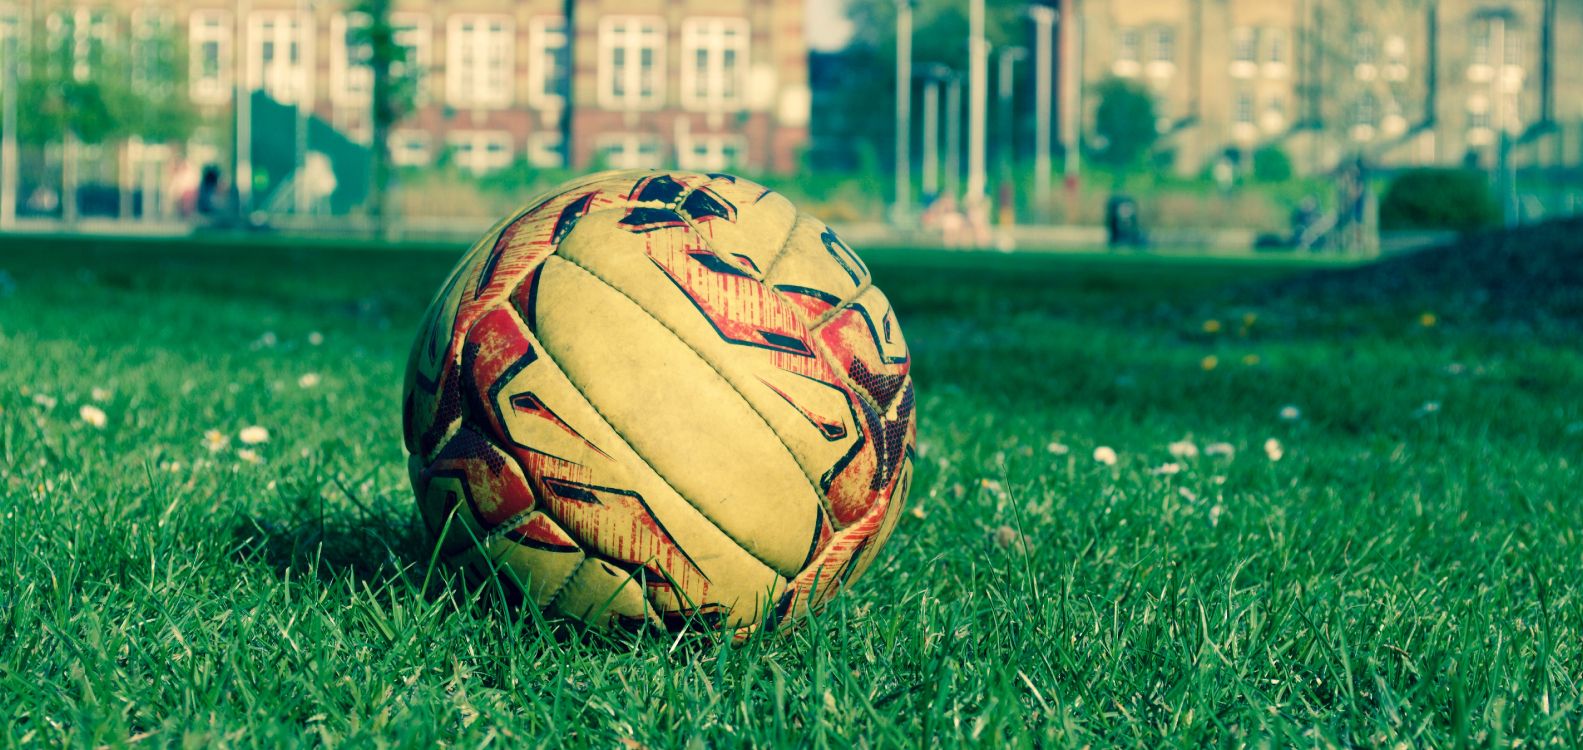 Brown and Black Soccer Ball on Green Grass Field During Daytime. Wallpaper in 6016x2849 Resolution